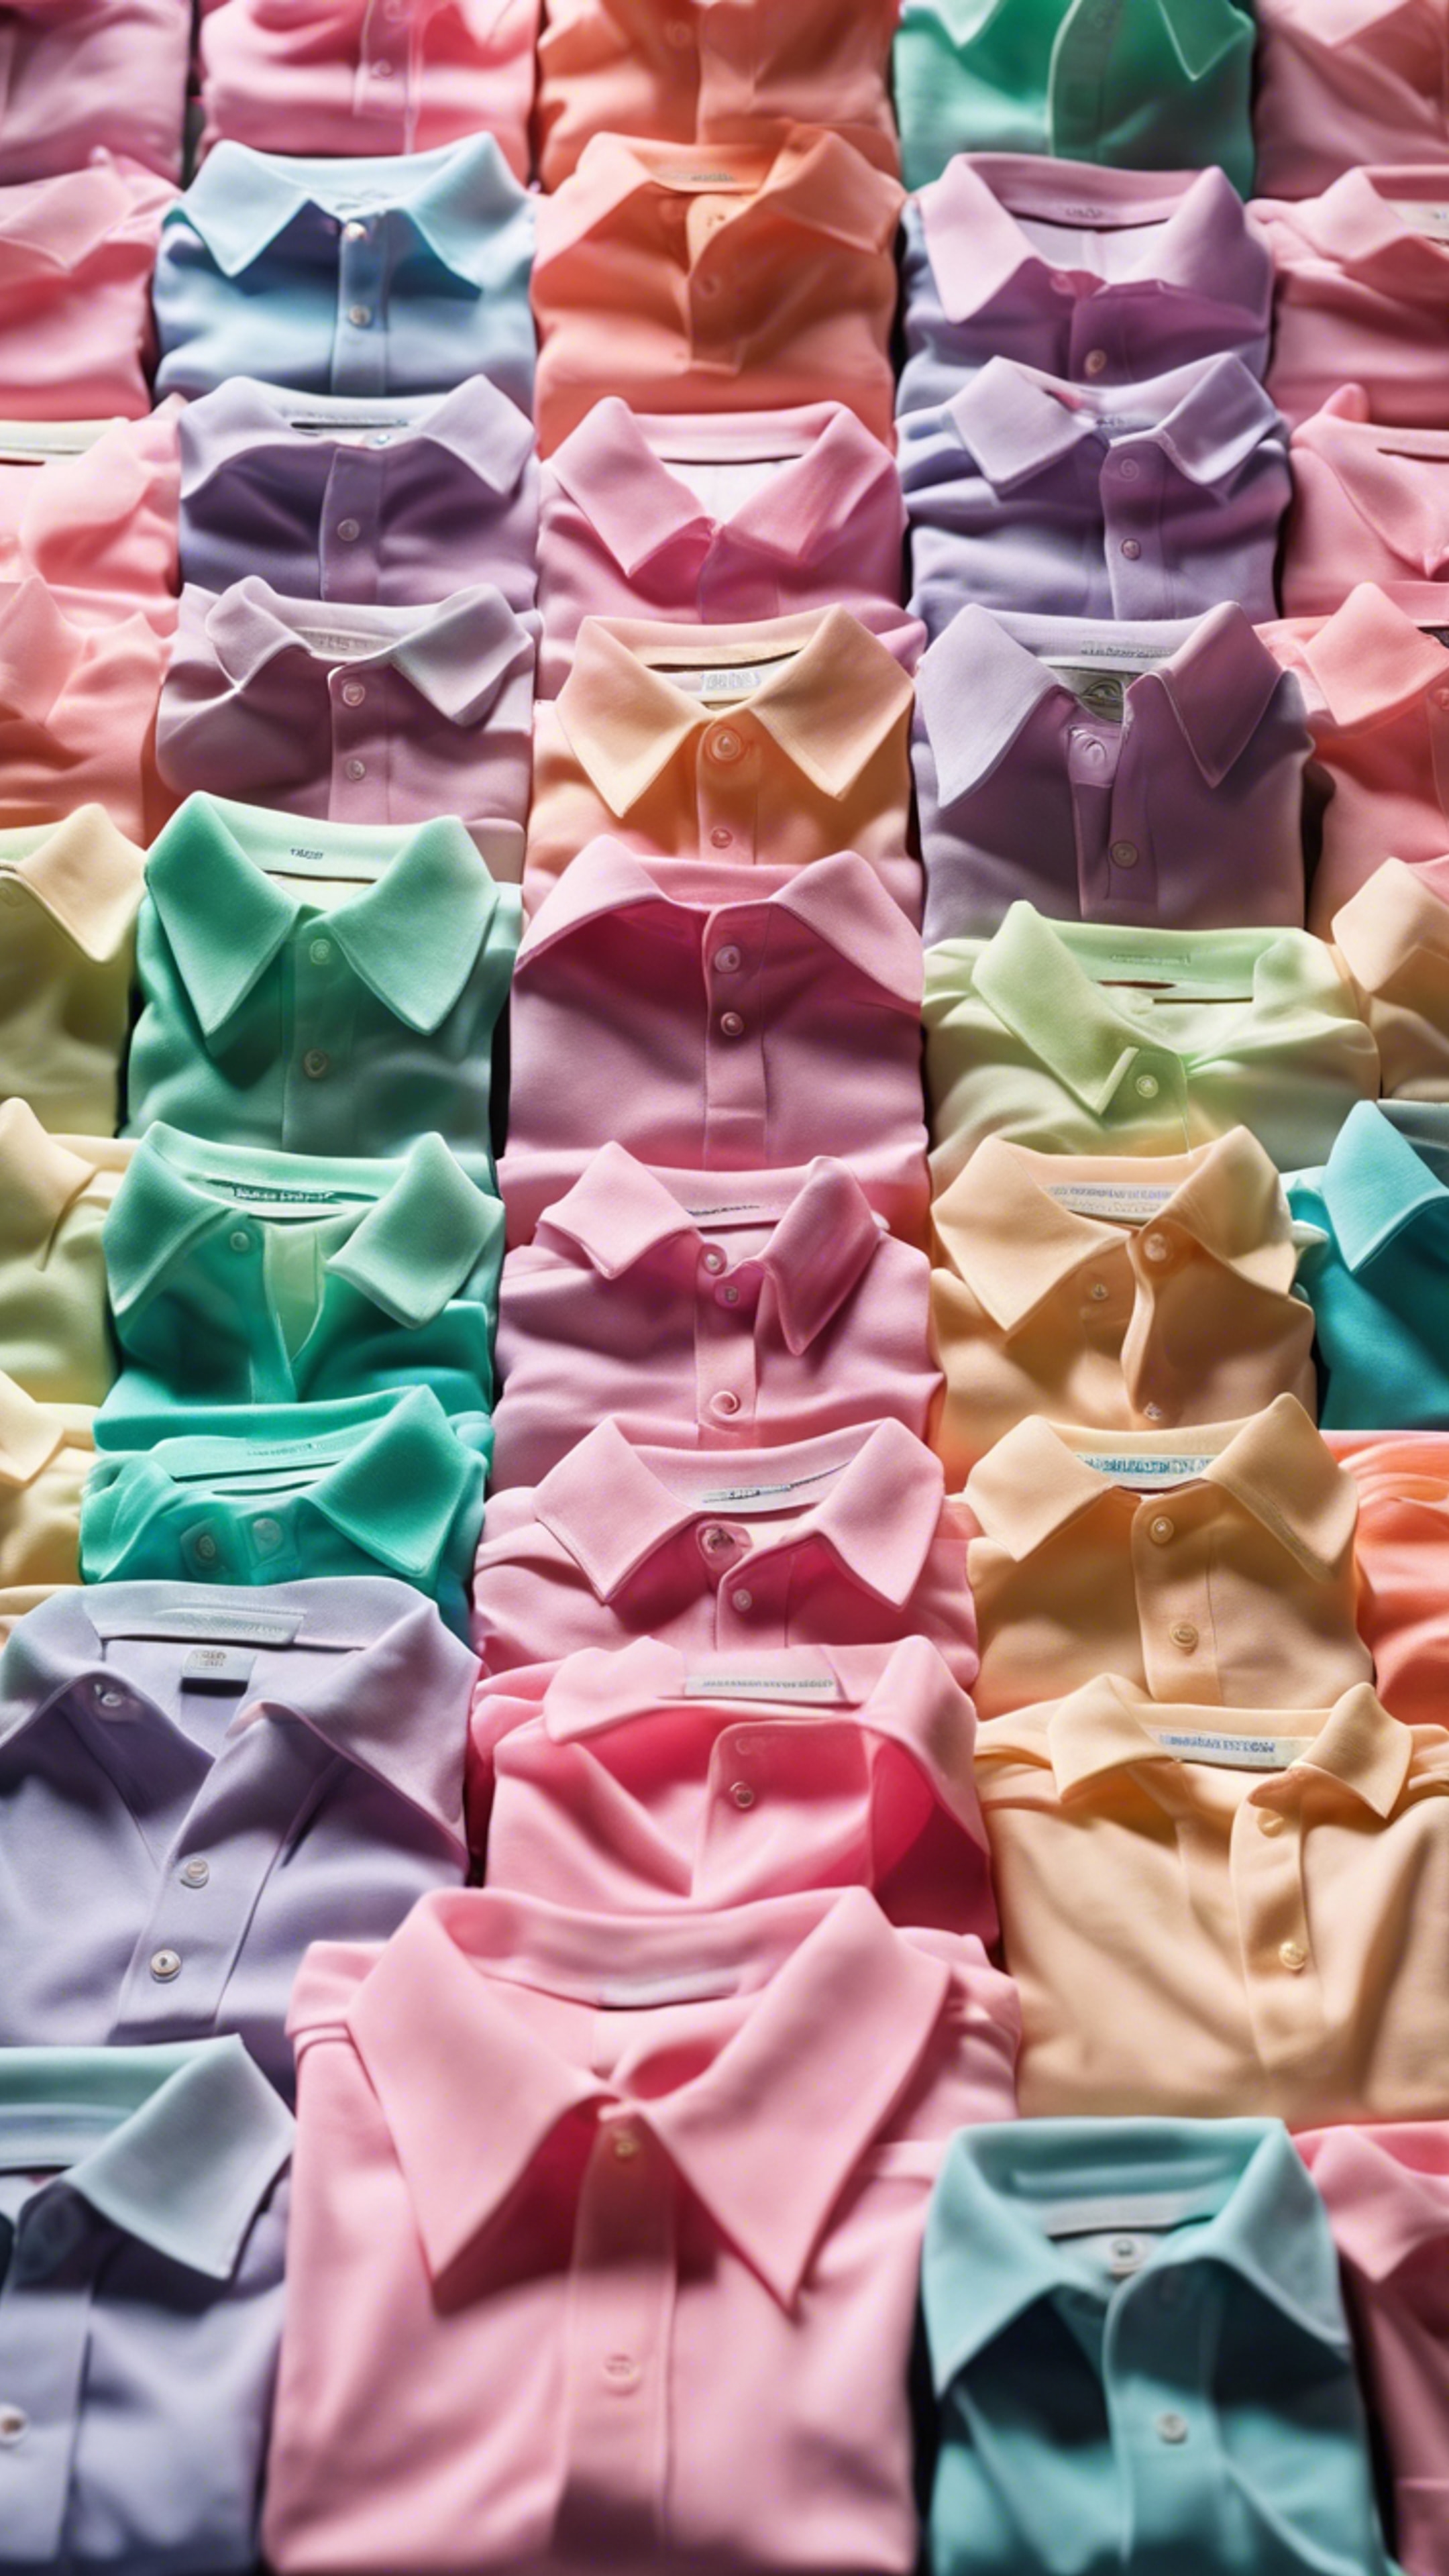 An array of neon pastel polos neatly arranged in a preppy boutique. Kertas dinding[90c24010f8ed4e2d91c1]